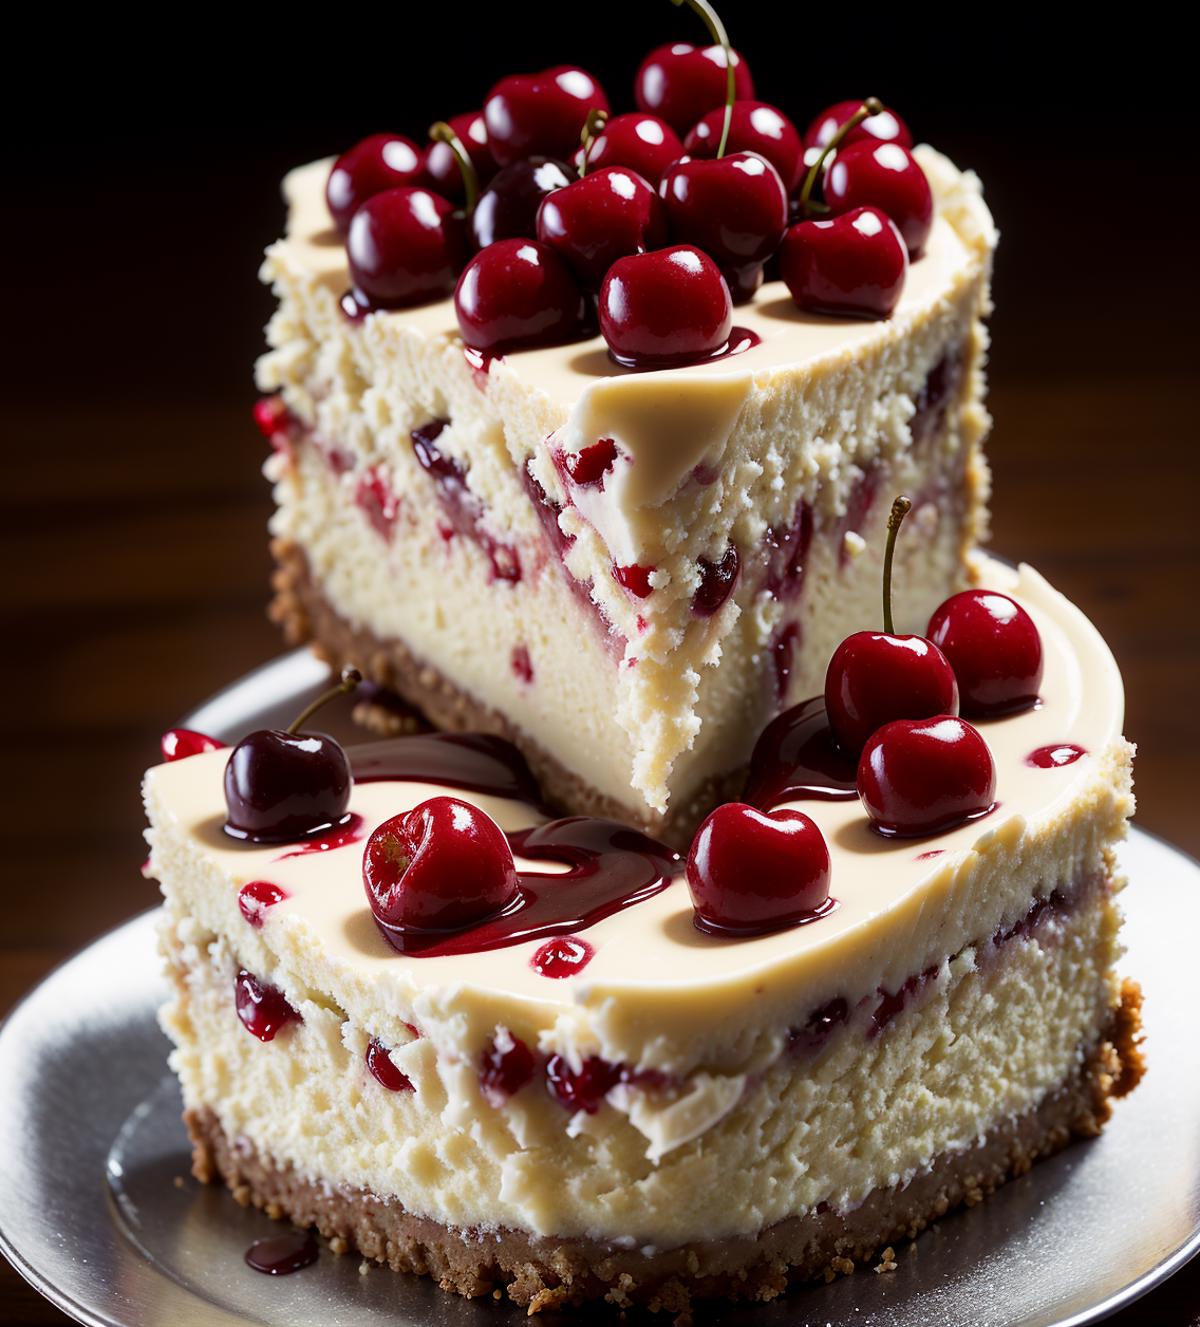 A delicious slice of cherry cheesecake on a plate.